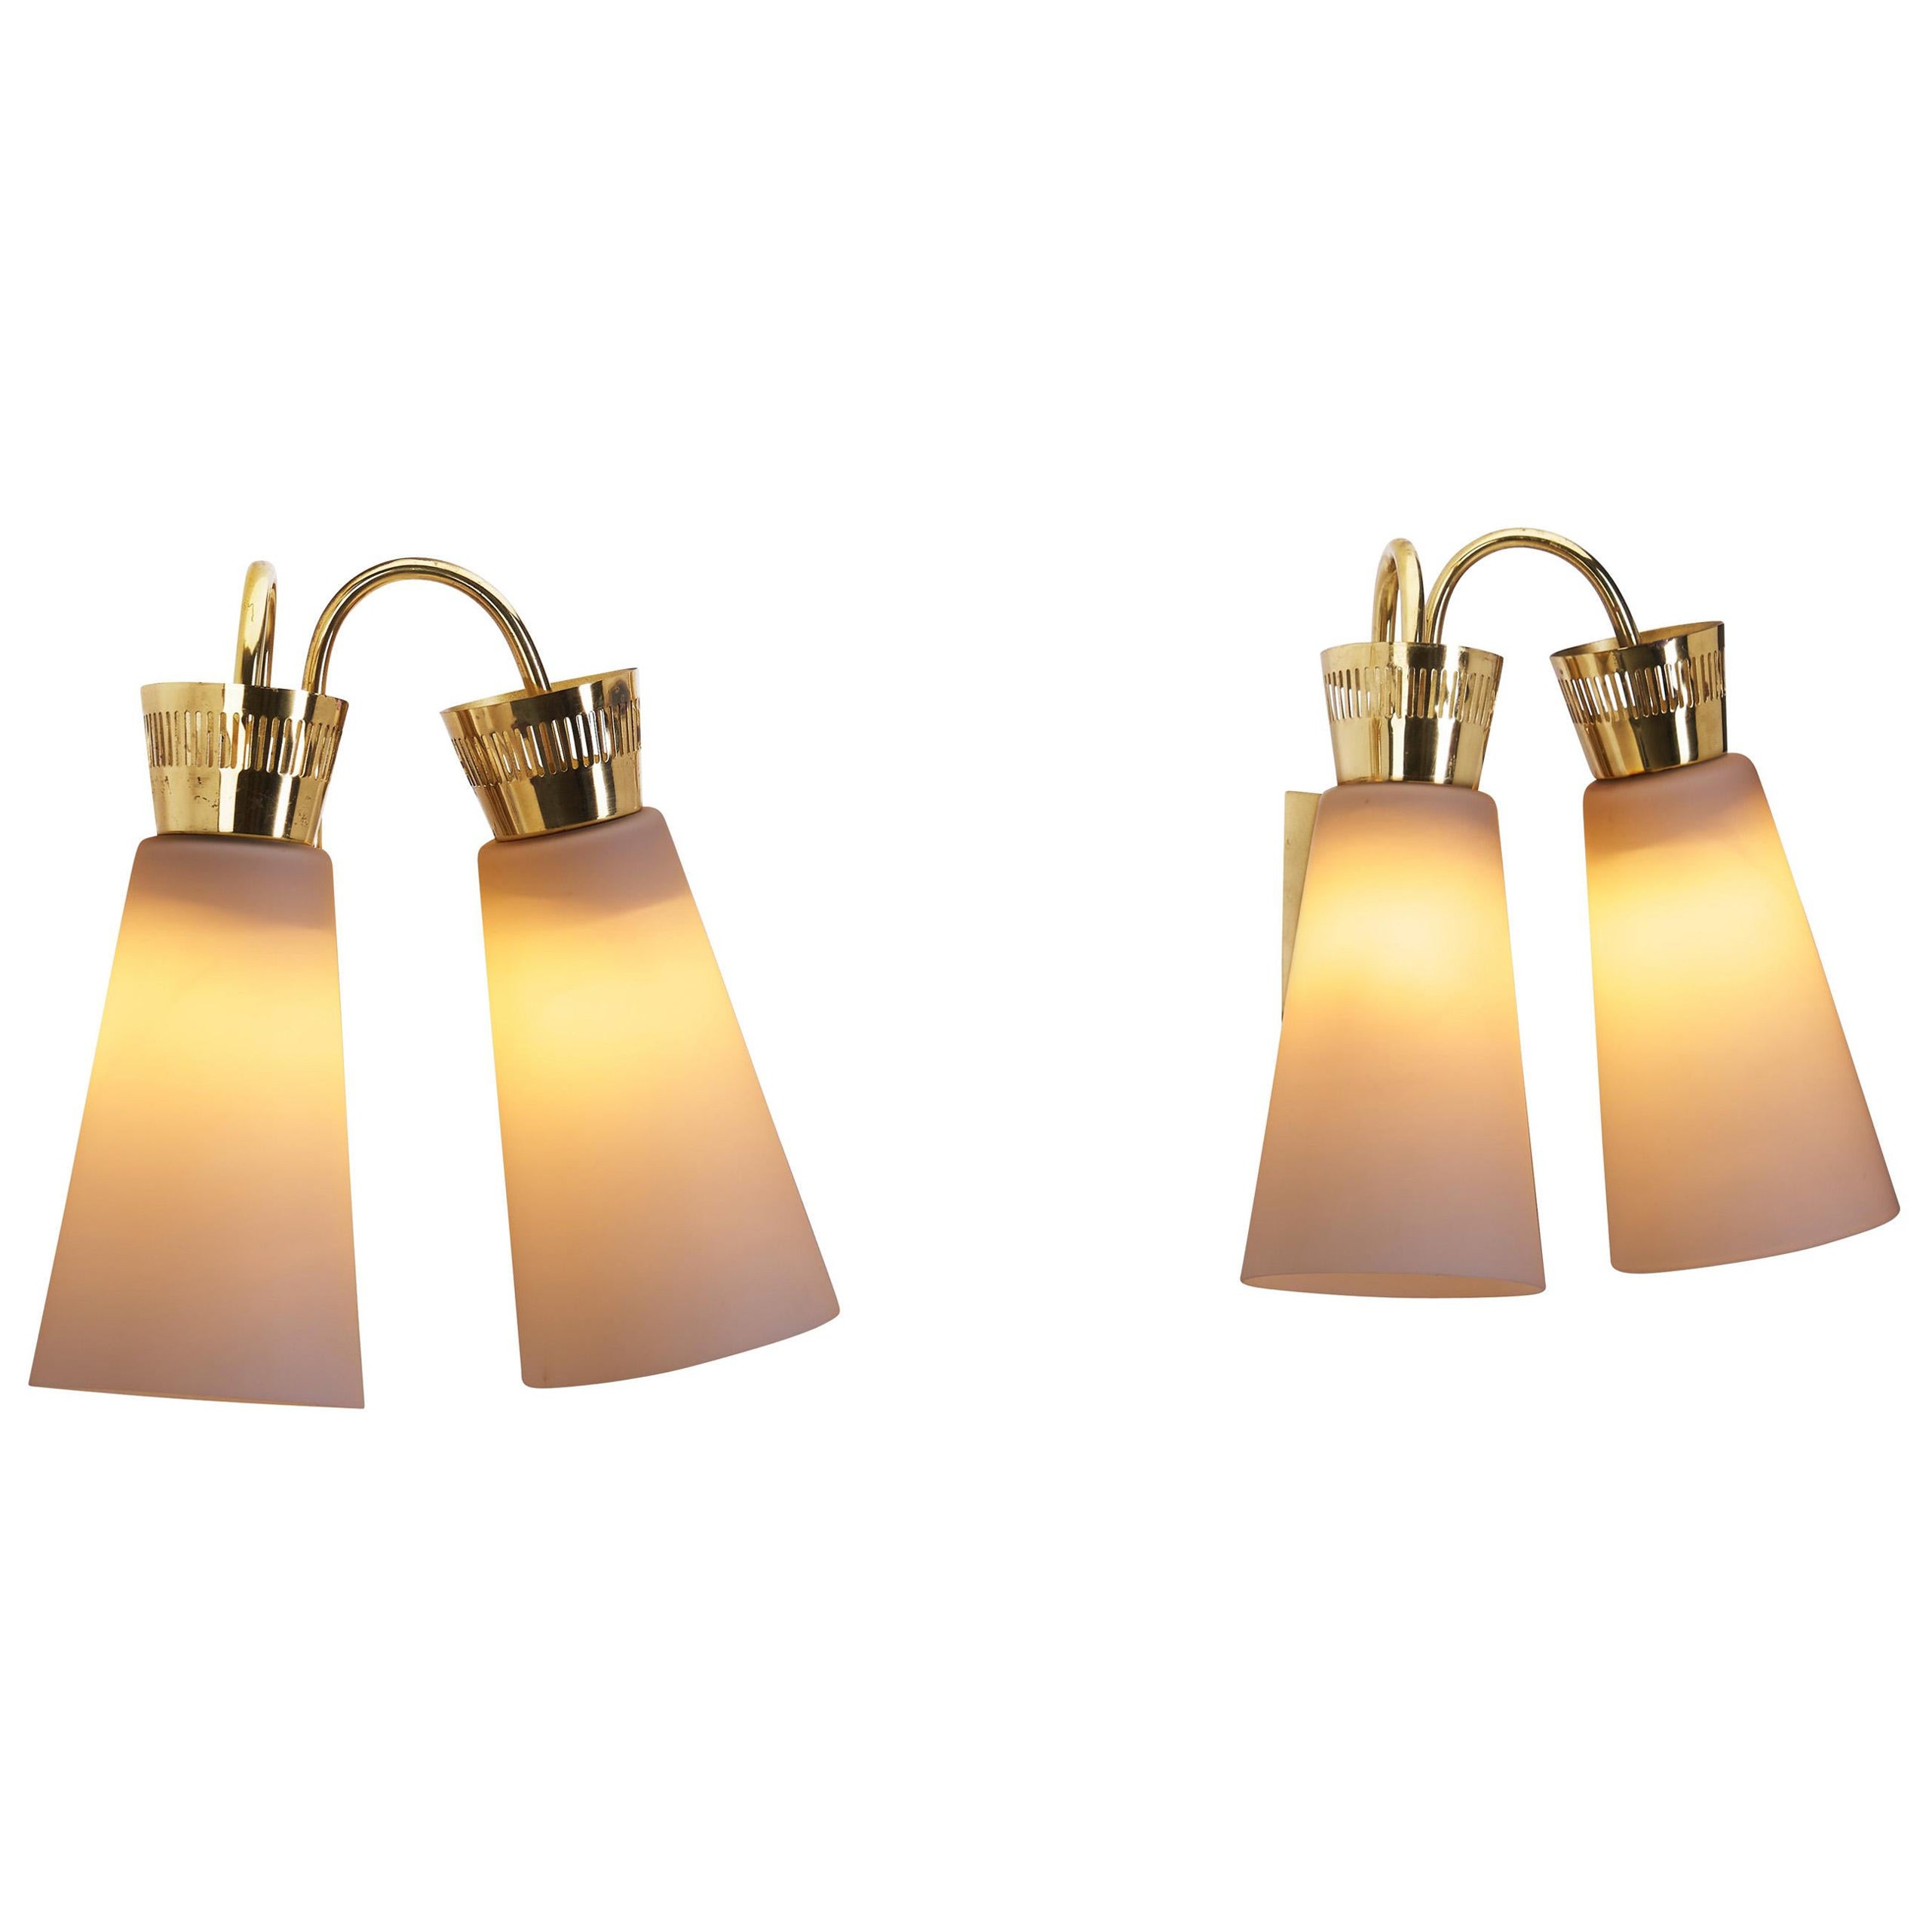 Frosted Glass "EY-60" Lights by Mauri Almari (Attr.) for Itsu, Finland 1950s For Sale